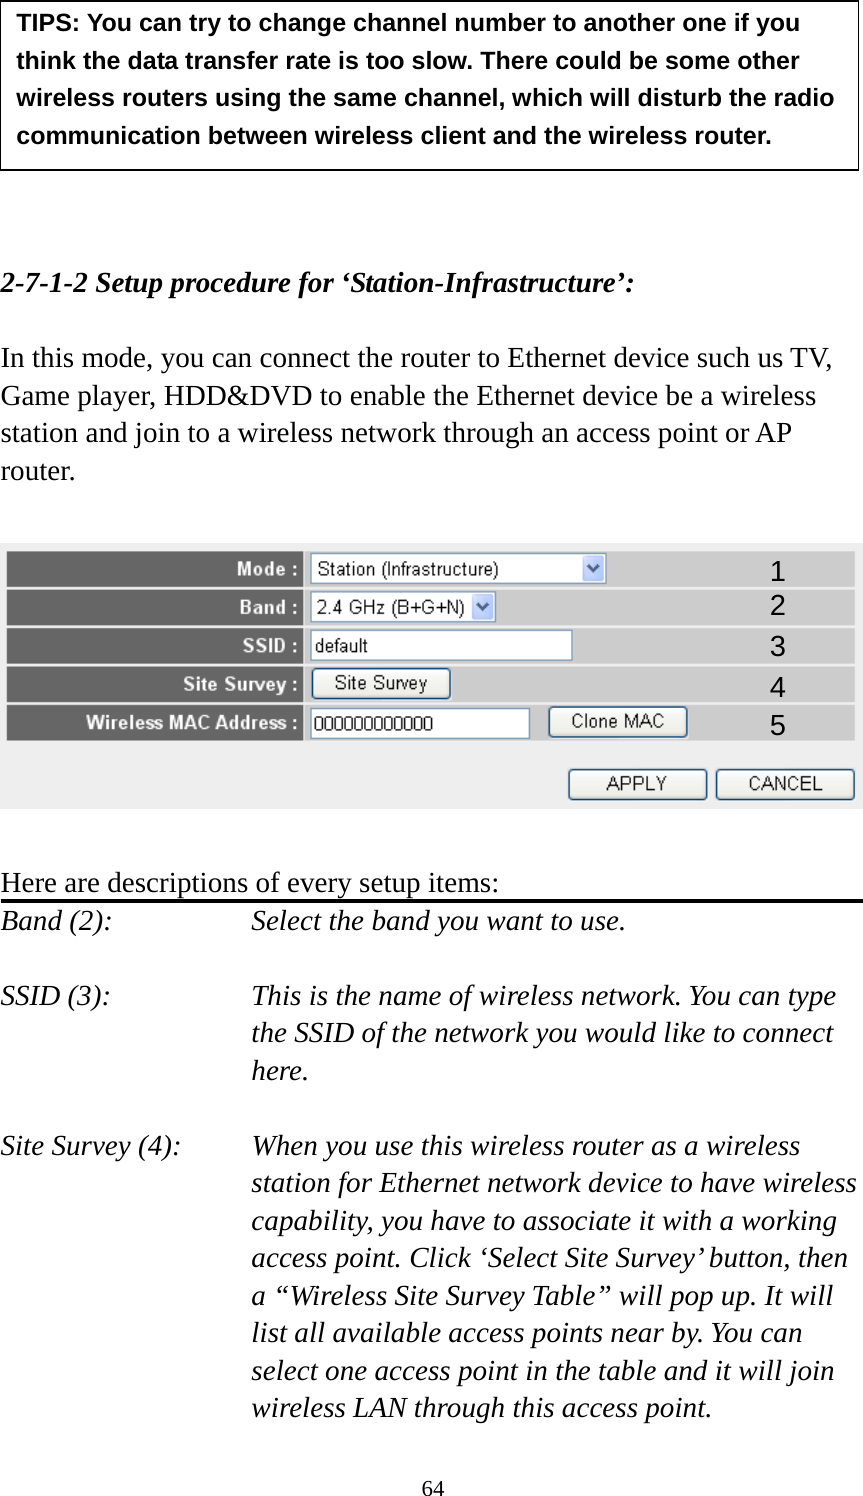 64        2-7-1-2 Setup procedure for ‘Station-Infrastructure’:  In this mode, you can connect the router to Ethernet device such us TV, Game player, HDD&amp;DVD to enable the Ethernet device be a wireless station and join to a wireless network through an access point or AP router.    Here are descriptions of every setup items: Band (2):  Select the band you want to use.  SSID (3):  This is the name of wireless network. You can type the SSID of the network you would like to connect here.  Site Survey (4):  When you use this wireless router as a wireless station for Ethernet network device to have wireless capability, you have to associate it with a working access point. Click ‘Select Site Survey’ button, then a “Wireless Site Survey Table” will pop up. It will list all available access points near by. You can select one access point in the table and it will join wireless LAN through this access point. TIPS: You can try to change channel number to another one if you think the data transfer rate is too slow. There could be some other wireless routers using the same channel, which will disturb the radio communication between wireless client and the wireless router. 1 2 3 4 5 